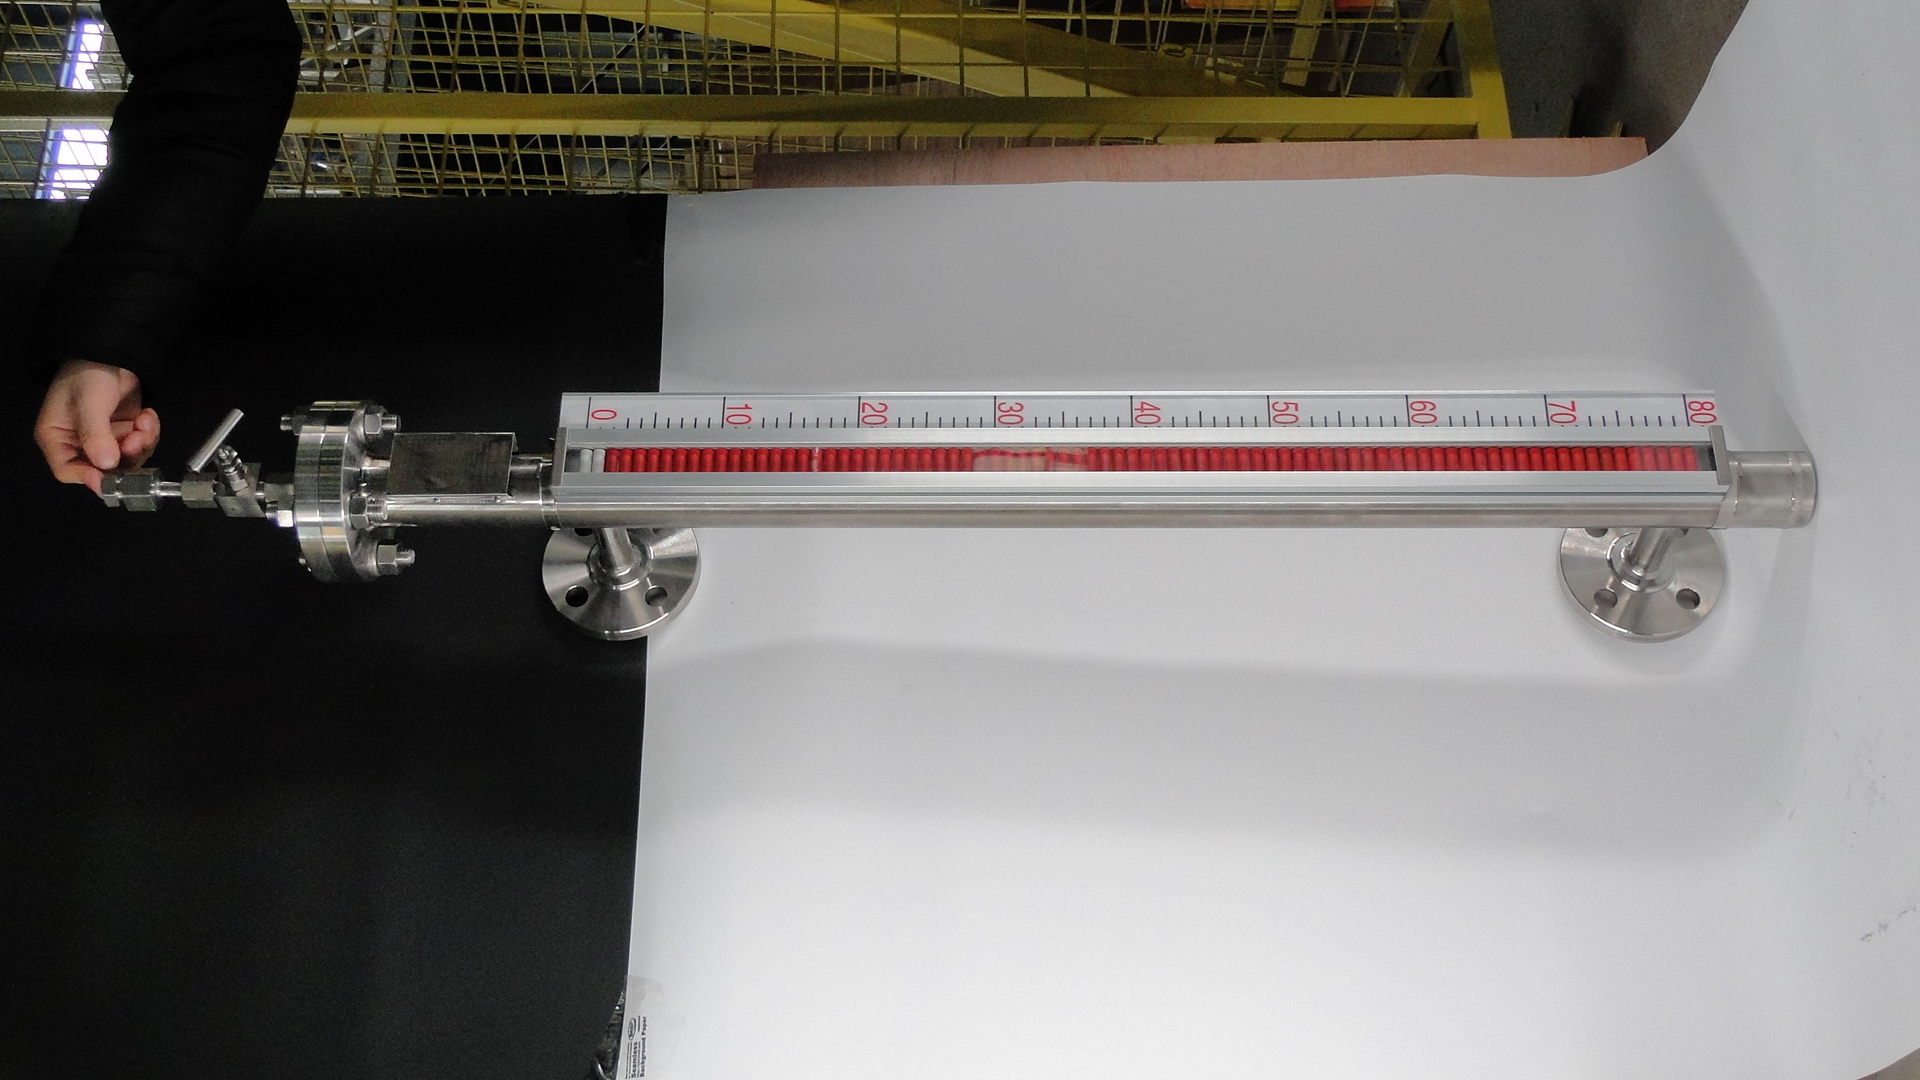 What are the parameters of the magnetic flap level gauge? What are the characteristics of the magnetic flap level gauge?